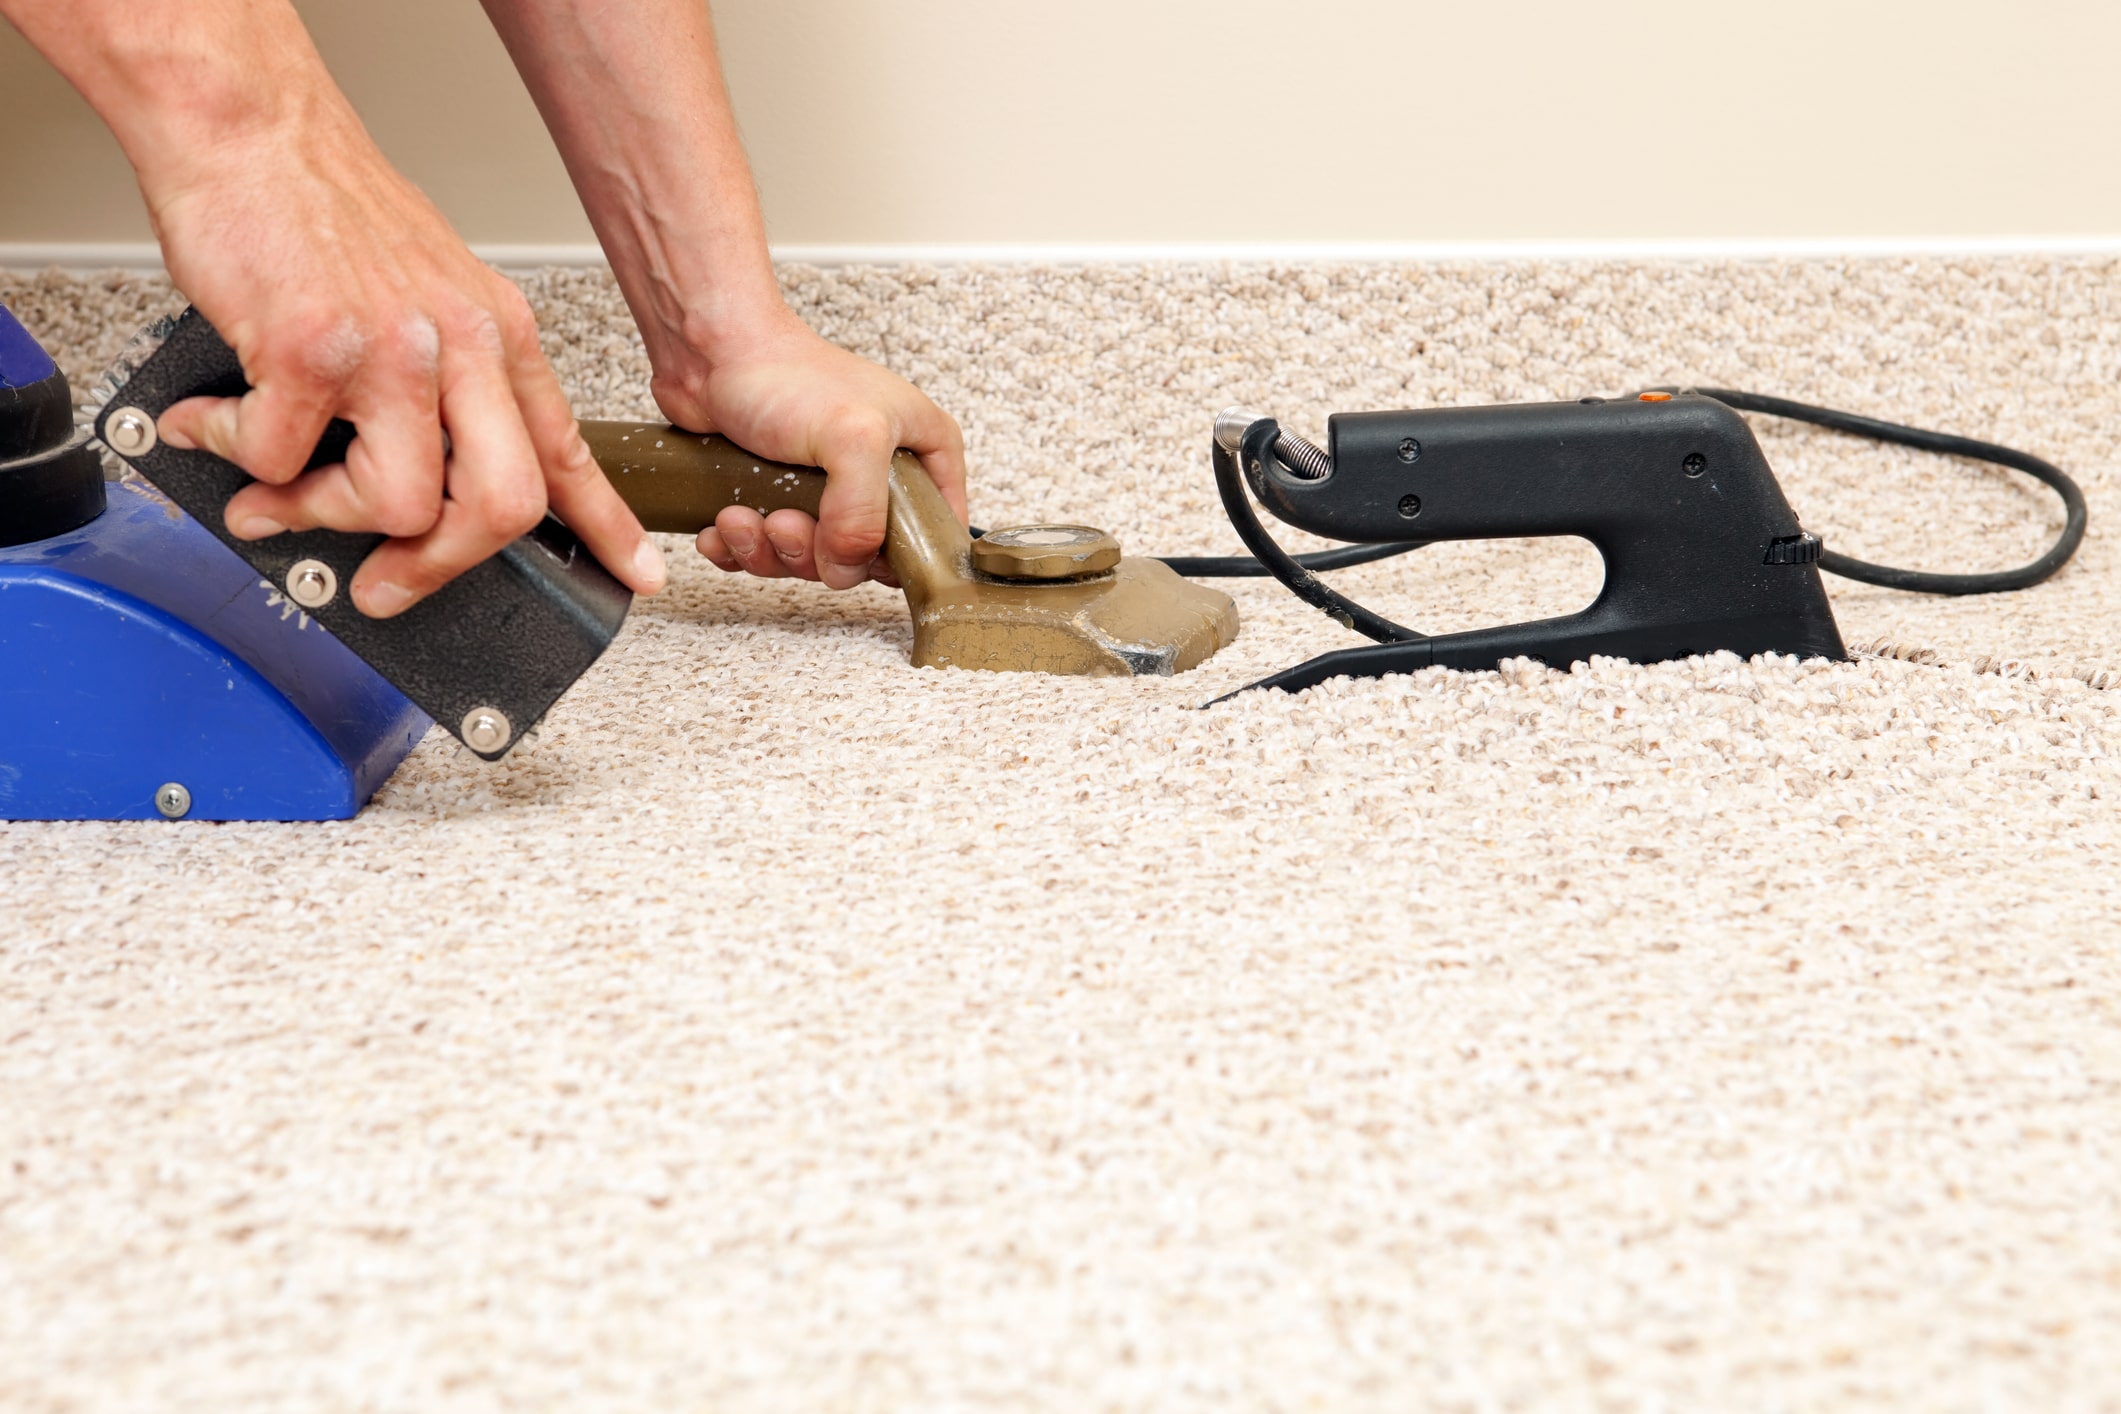 Carpet Seam Repairs: Here Is How To Do It